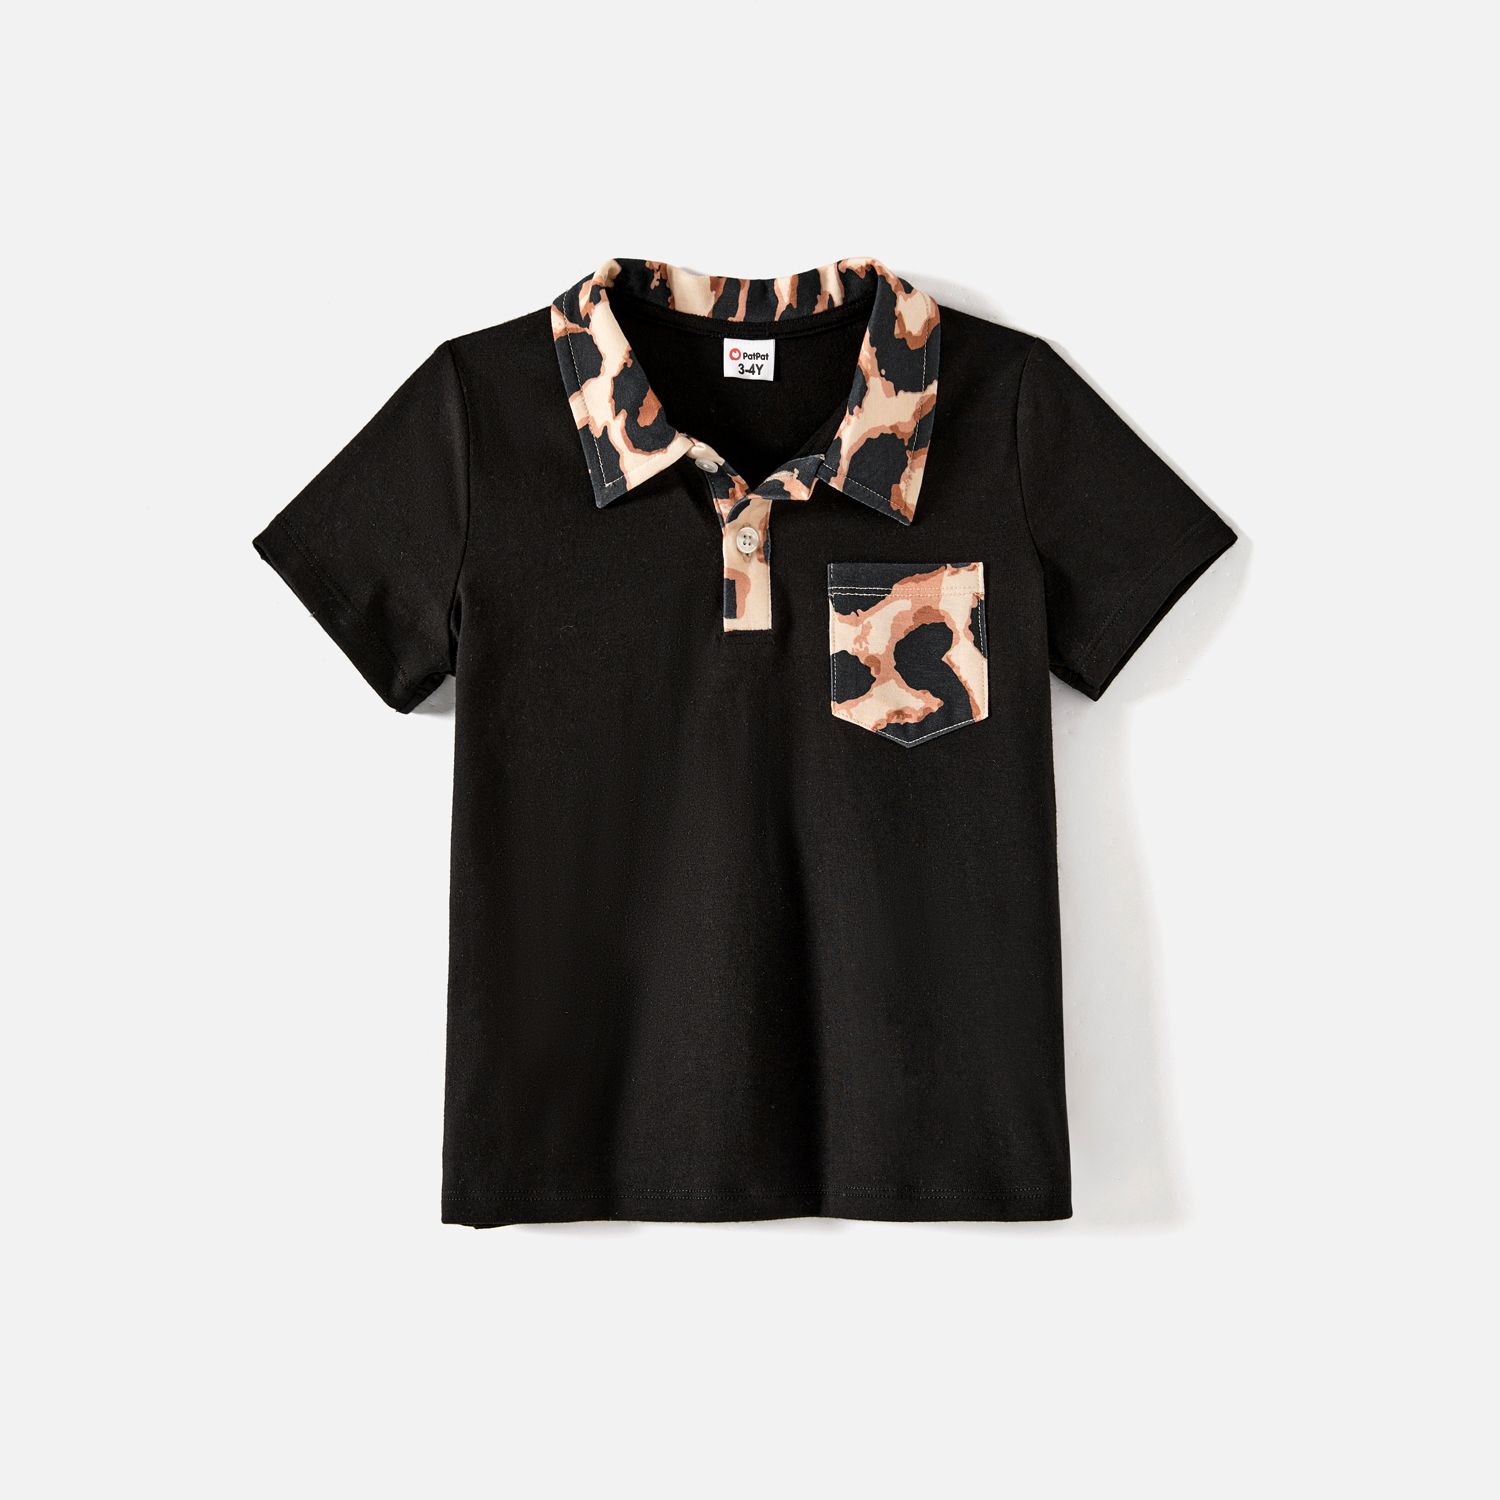 Family Matching Leopard Print Naia Strappy Split Dresses And Cotton Short-sleeve Polo Shirts Sets